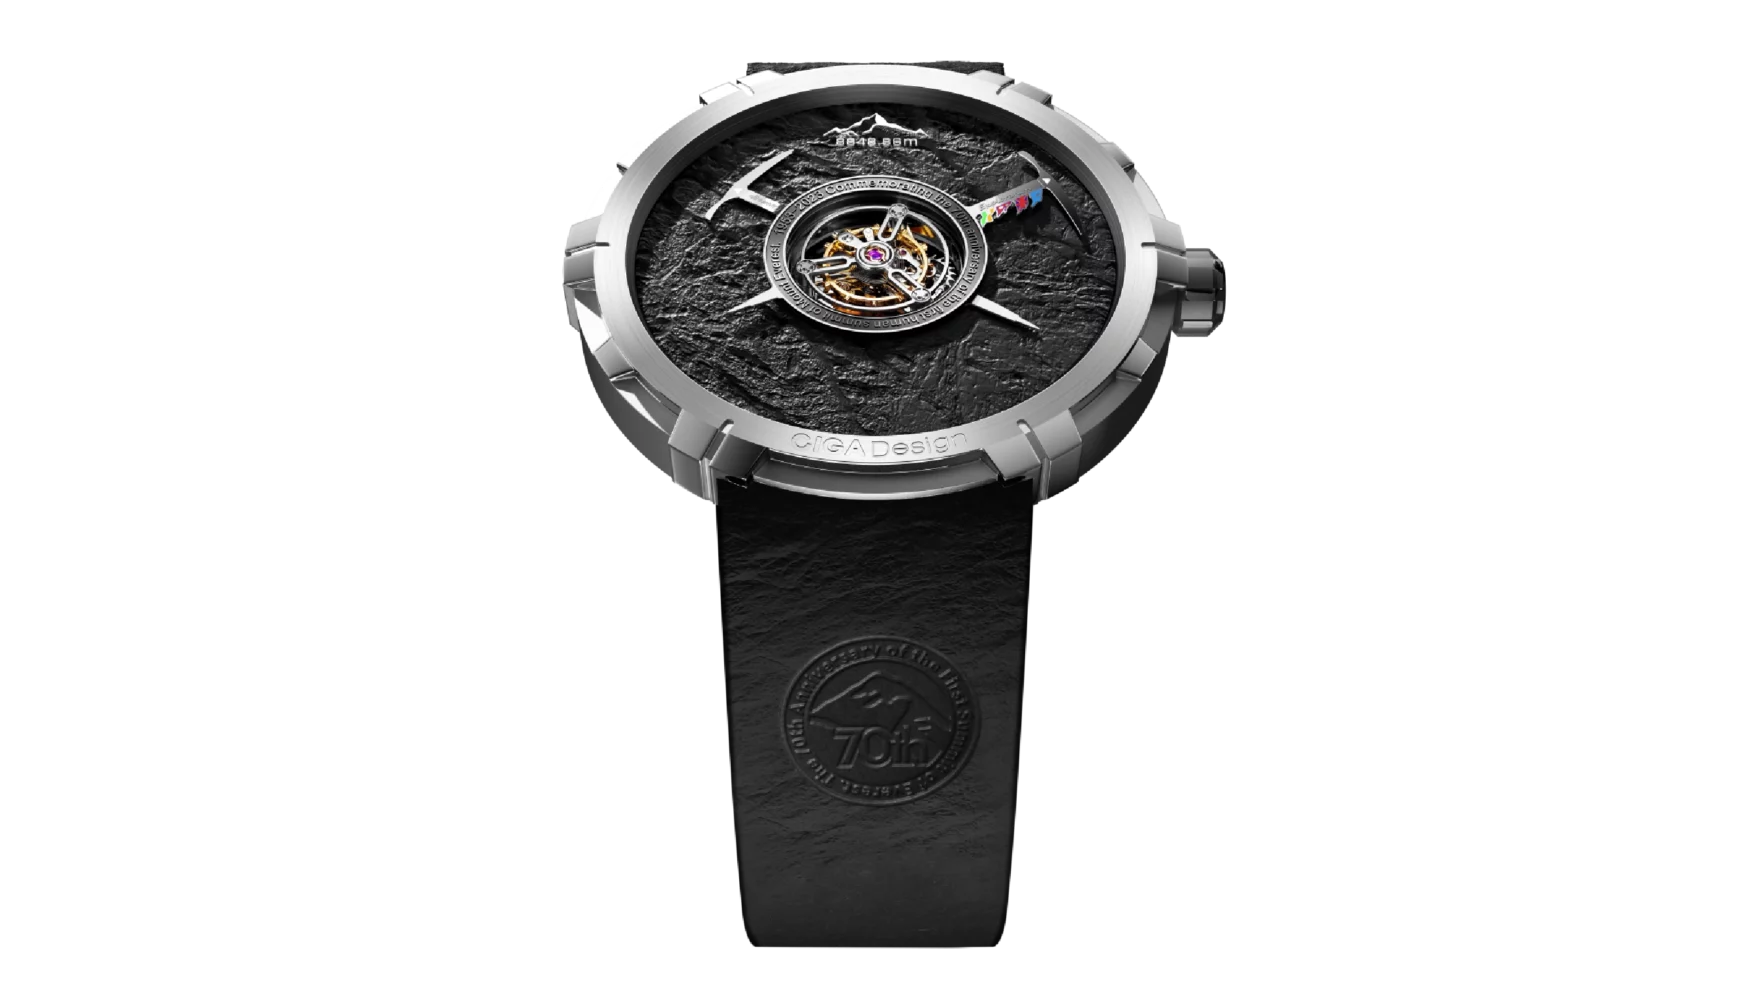 CIGA Design’s Central Tourbillon Mount Everest Homage Edition represents another peak for Chinese watchmaking